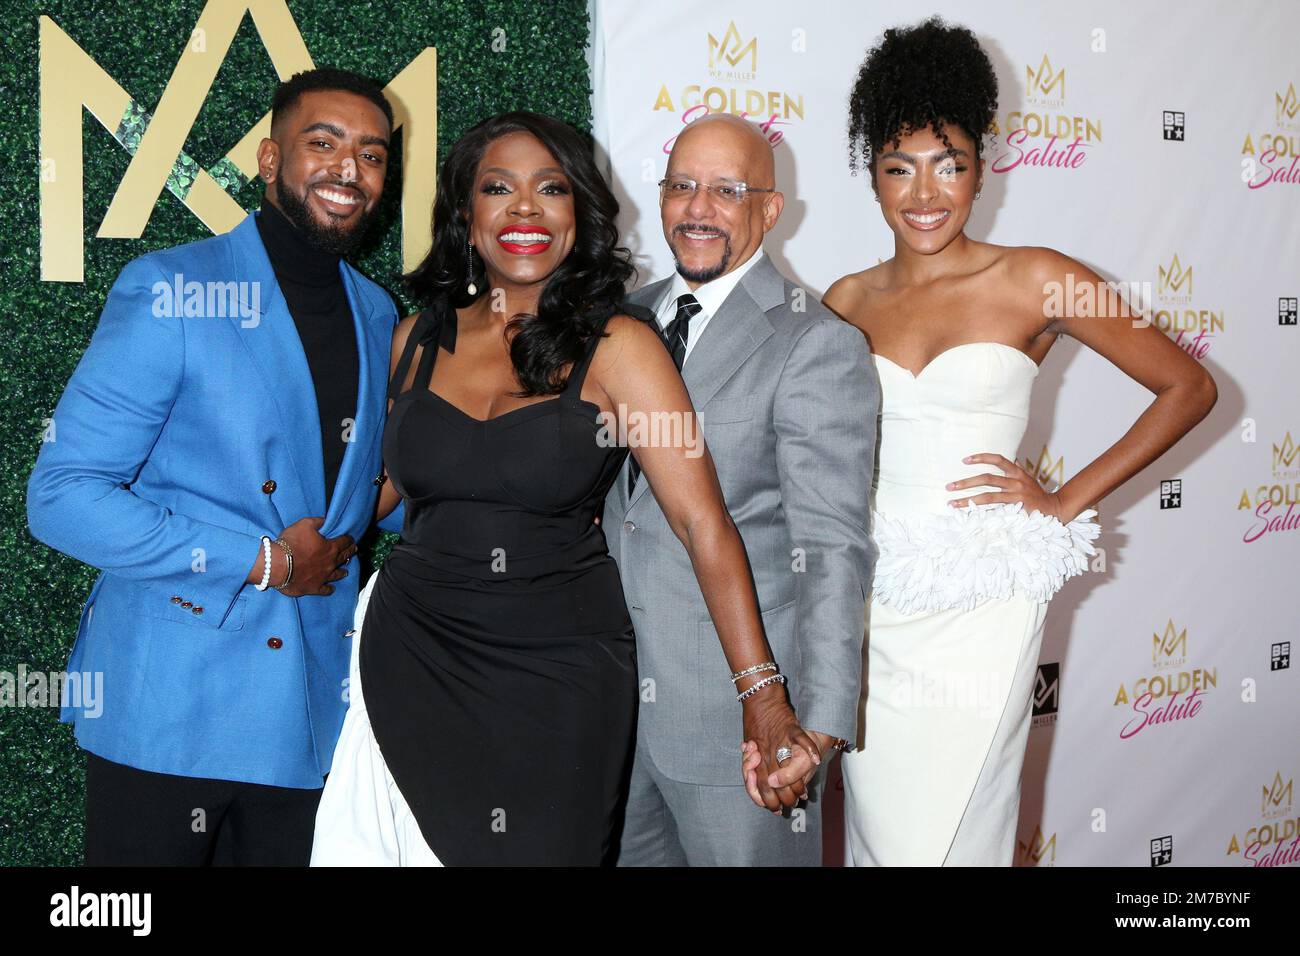 January 8, 2023, Marina Del Rey, CA, USA: LOS ANGELES - JAN 8:  Etienne Maurice, Sheryl Lee Ralph, Vincent Hughes,Â Ivy-Victoria Maurice at A Golden Salute to Sheryl Lee Ralph and Niecy Nash-Betts at the Ritz Carlton Hotel on January 8, 2023 in Marina Del Rey, CA (Credit Image: © Kay Blake/ZUMA Press Wire) Stock Photo